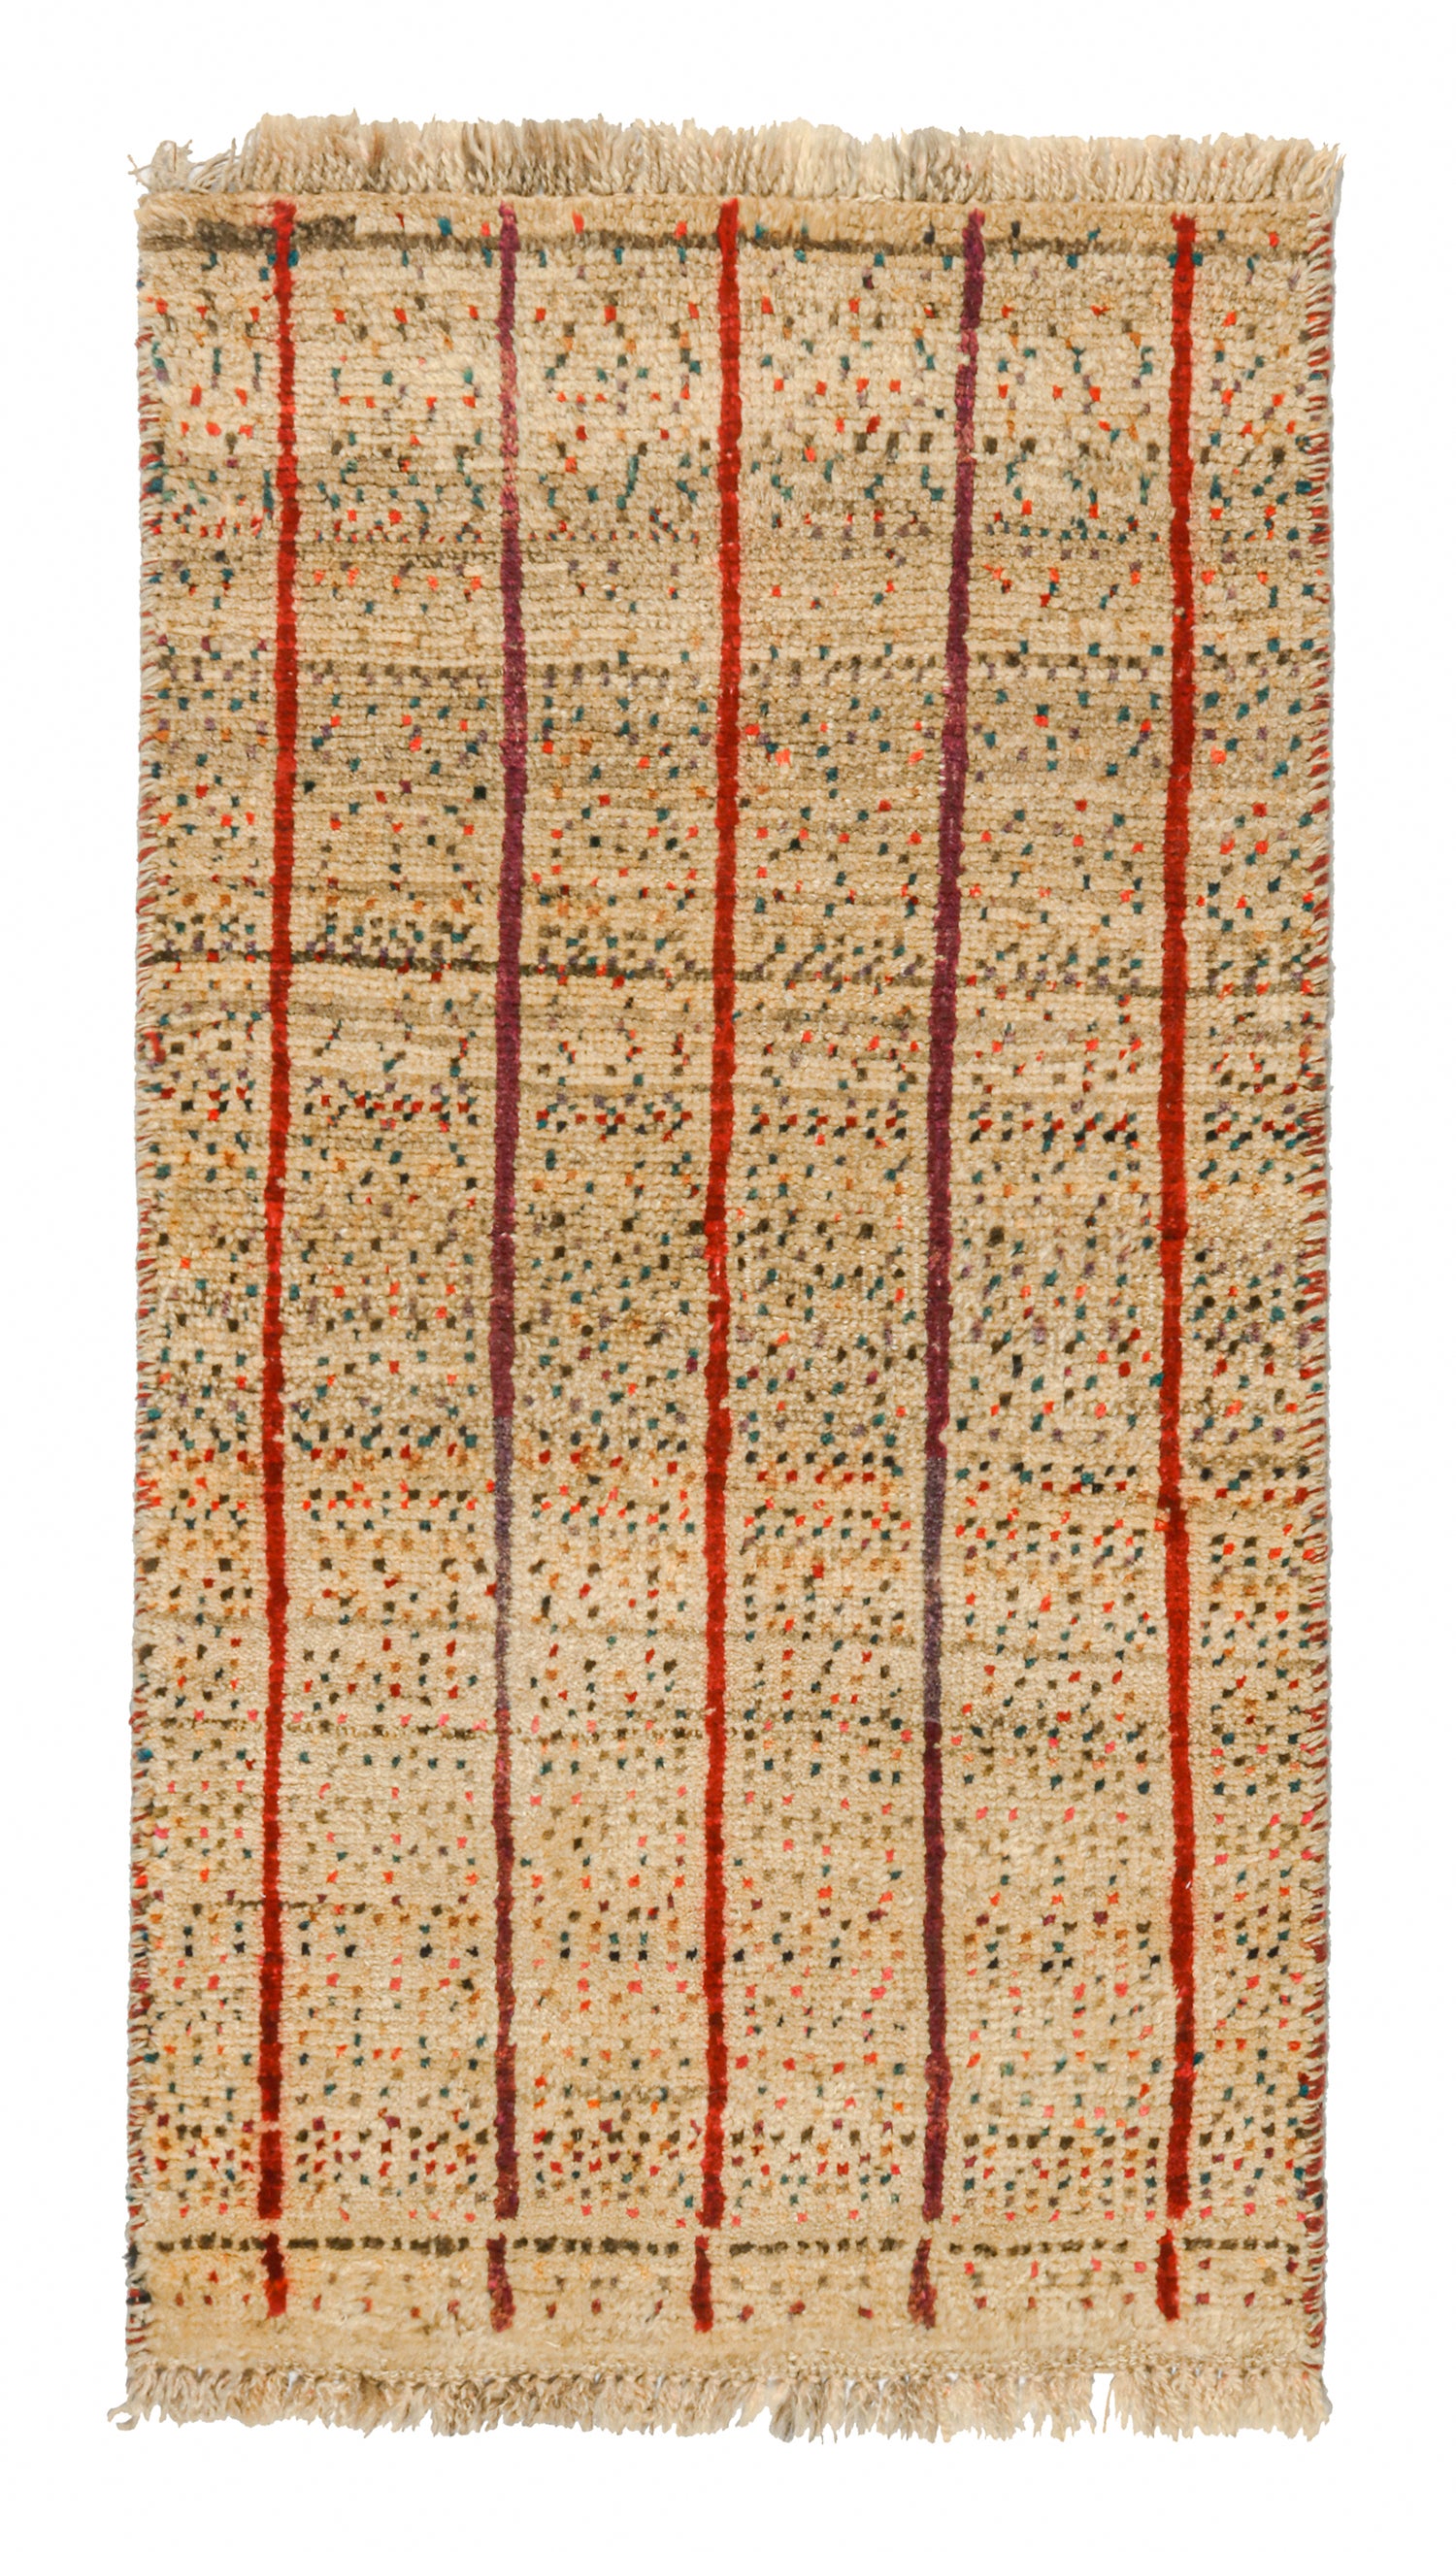 Vintage Gabbeh Tribal Rug in Beige- Red Stripes and Colorful Dots by Rug & Kilim For Sale